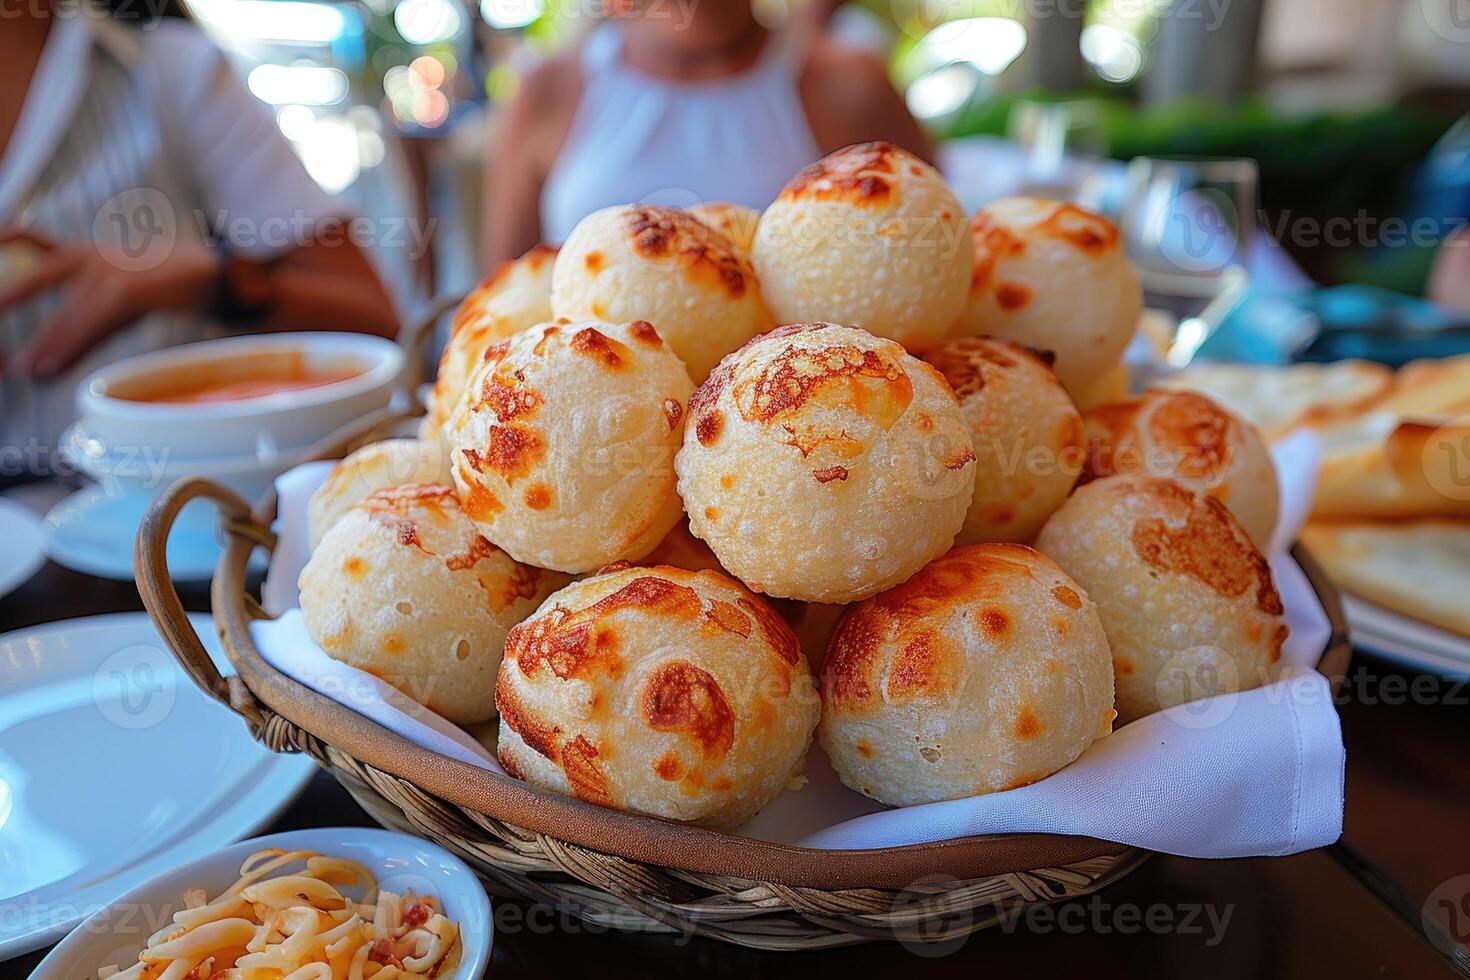 Pao de Queijo brazilian cheese bread in the kitchen table professional advertising food photography photo